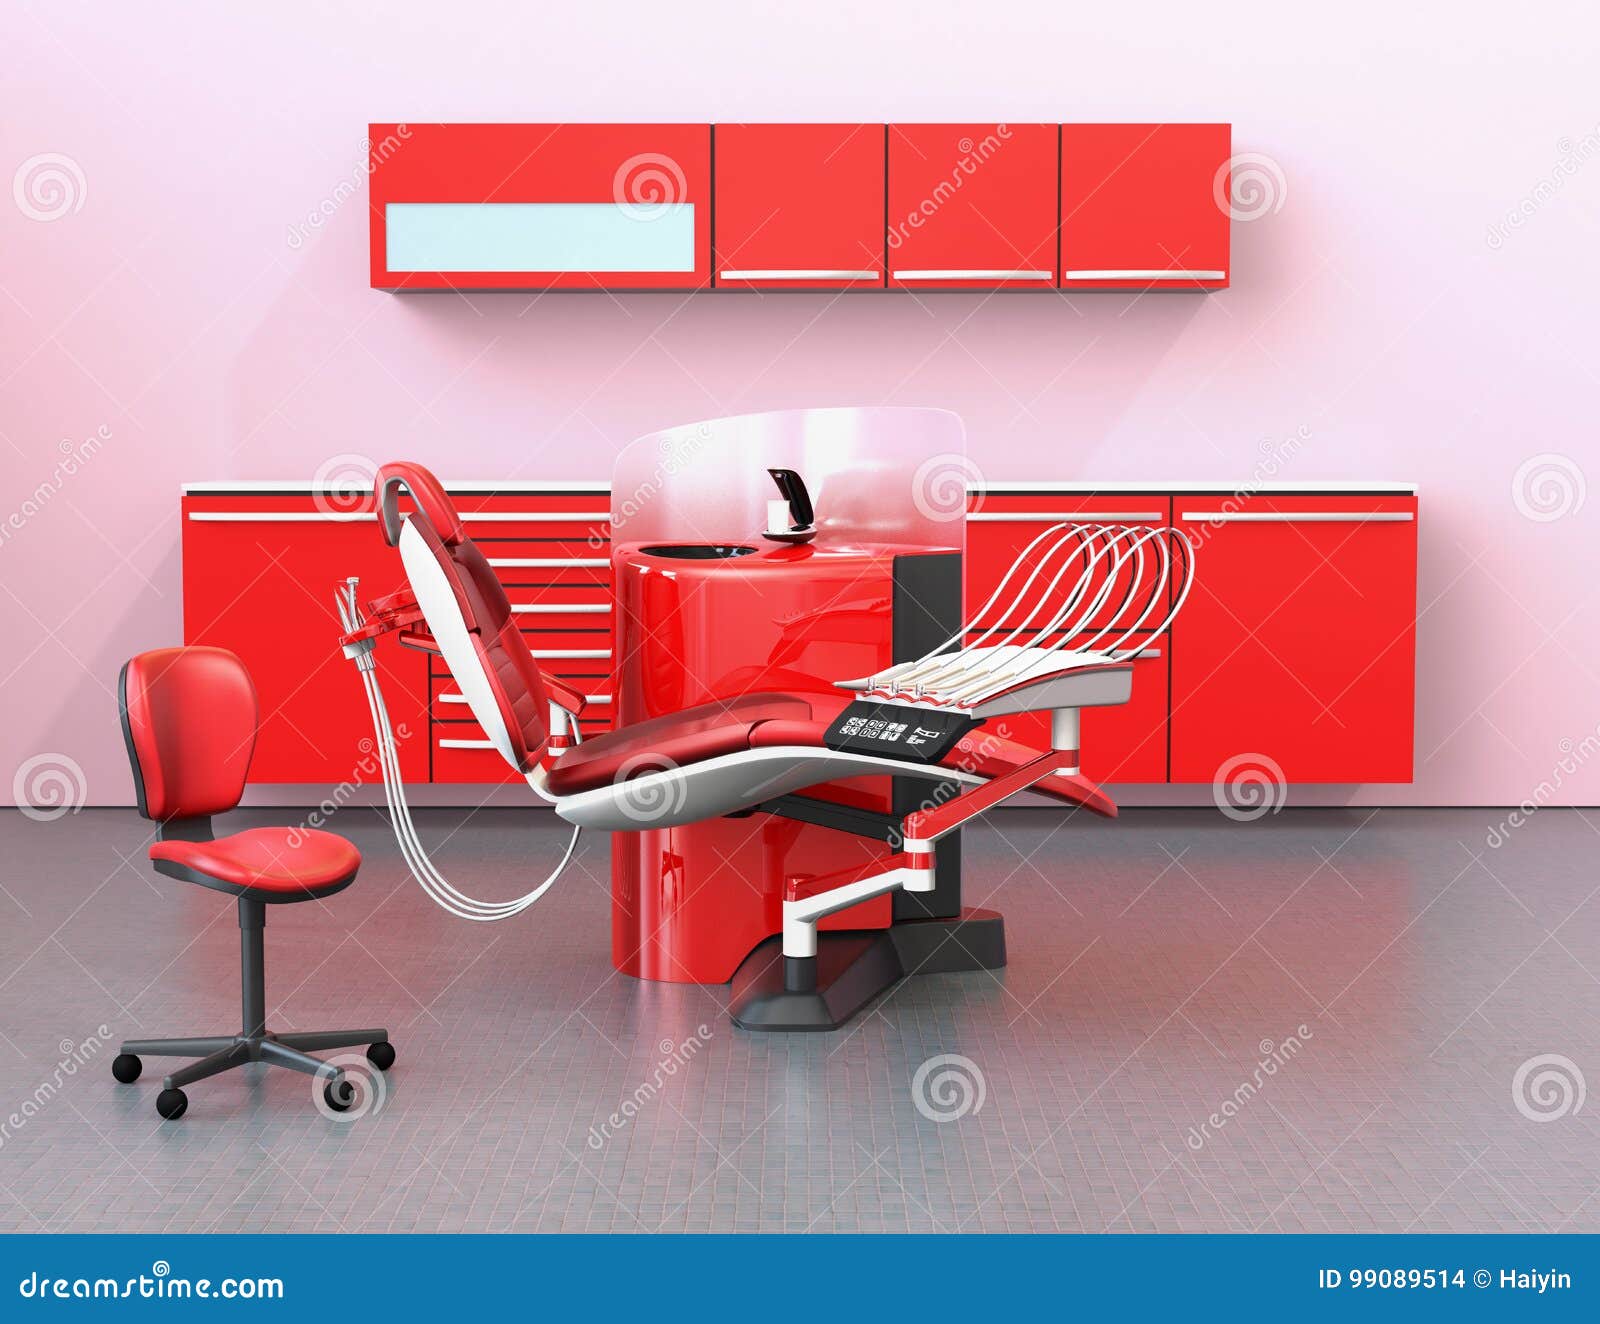 Dental Office Interior With Red Unit Equipment And Cabinet Stock